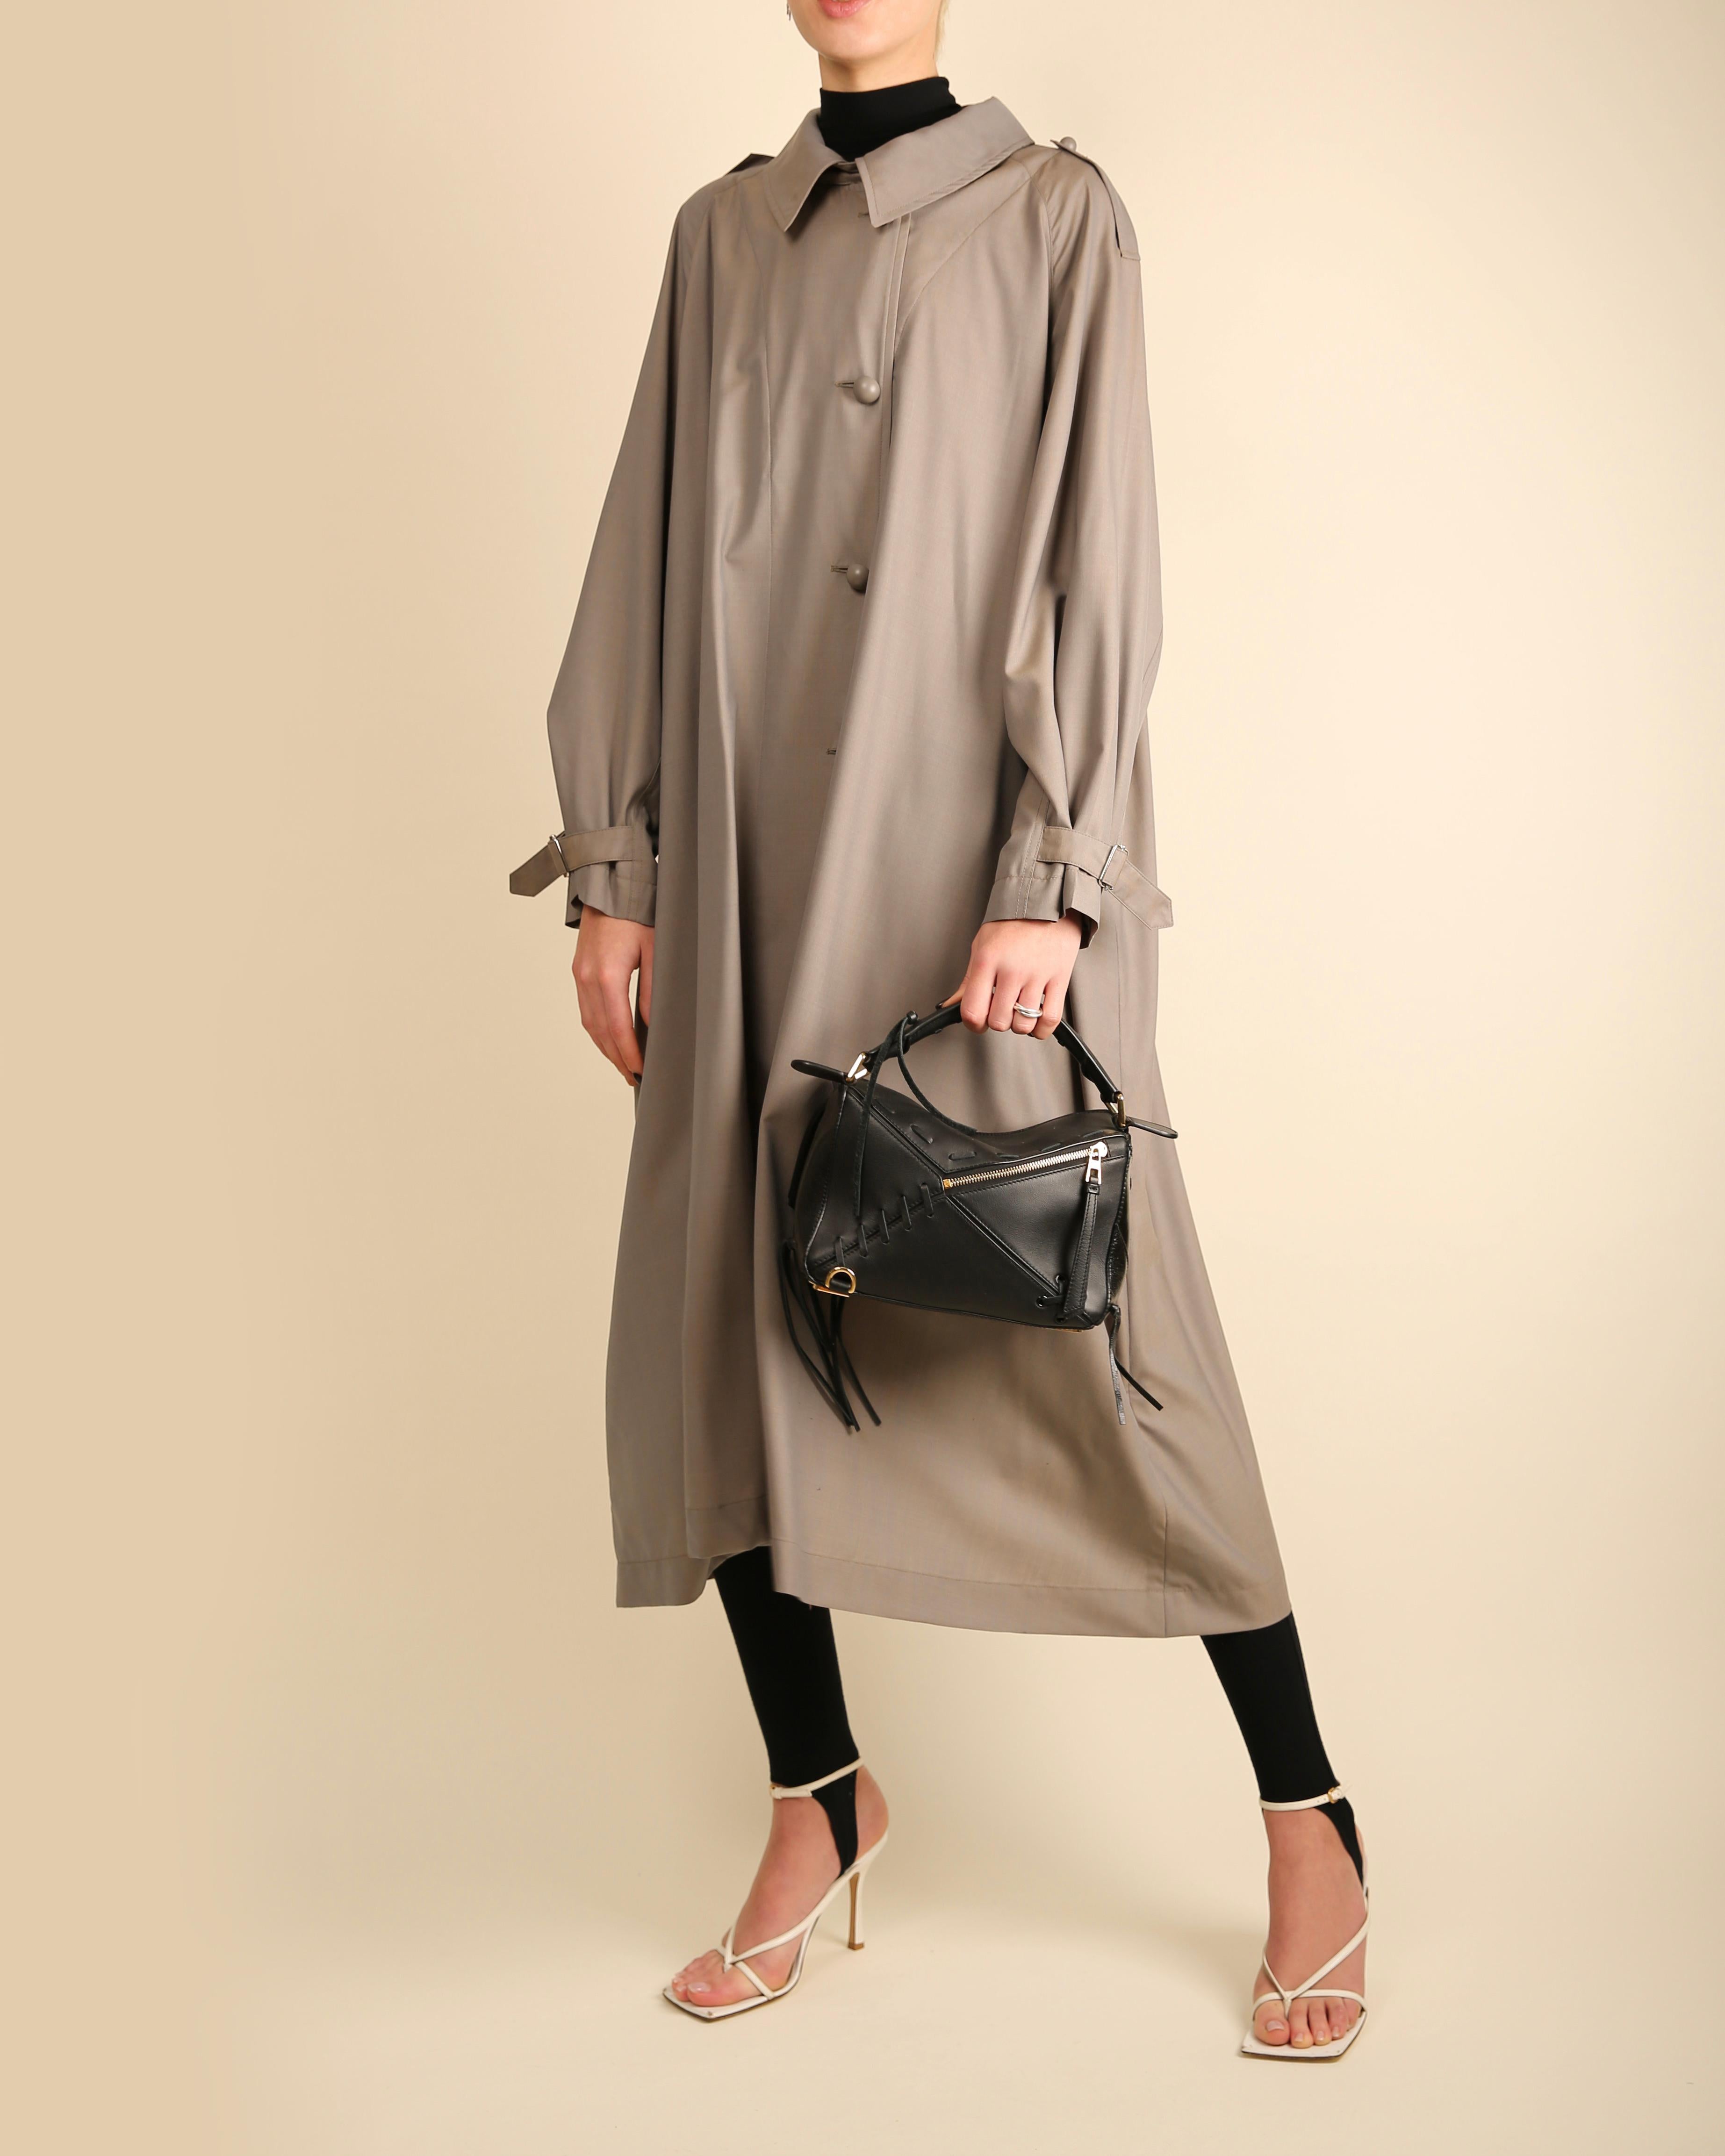 Celine Fall 2017 grey oversized maxi belted wool cashmere trench coat FR 36 3